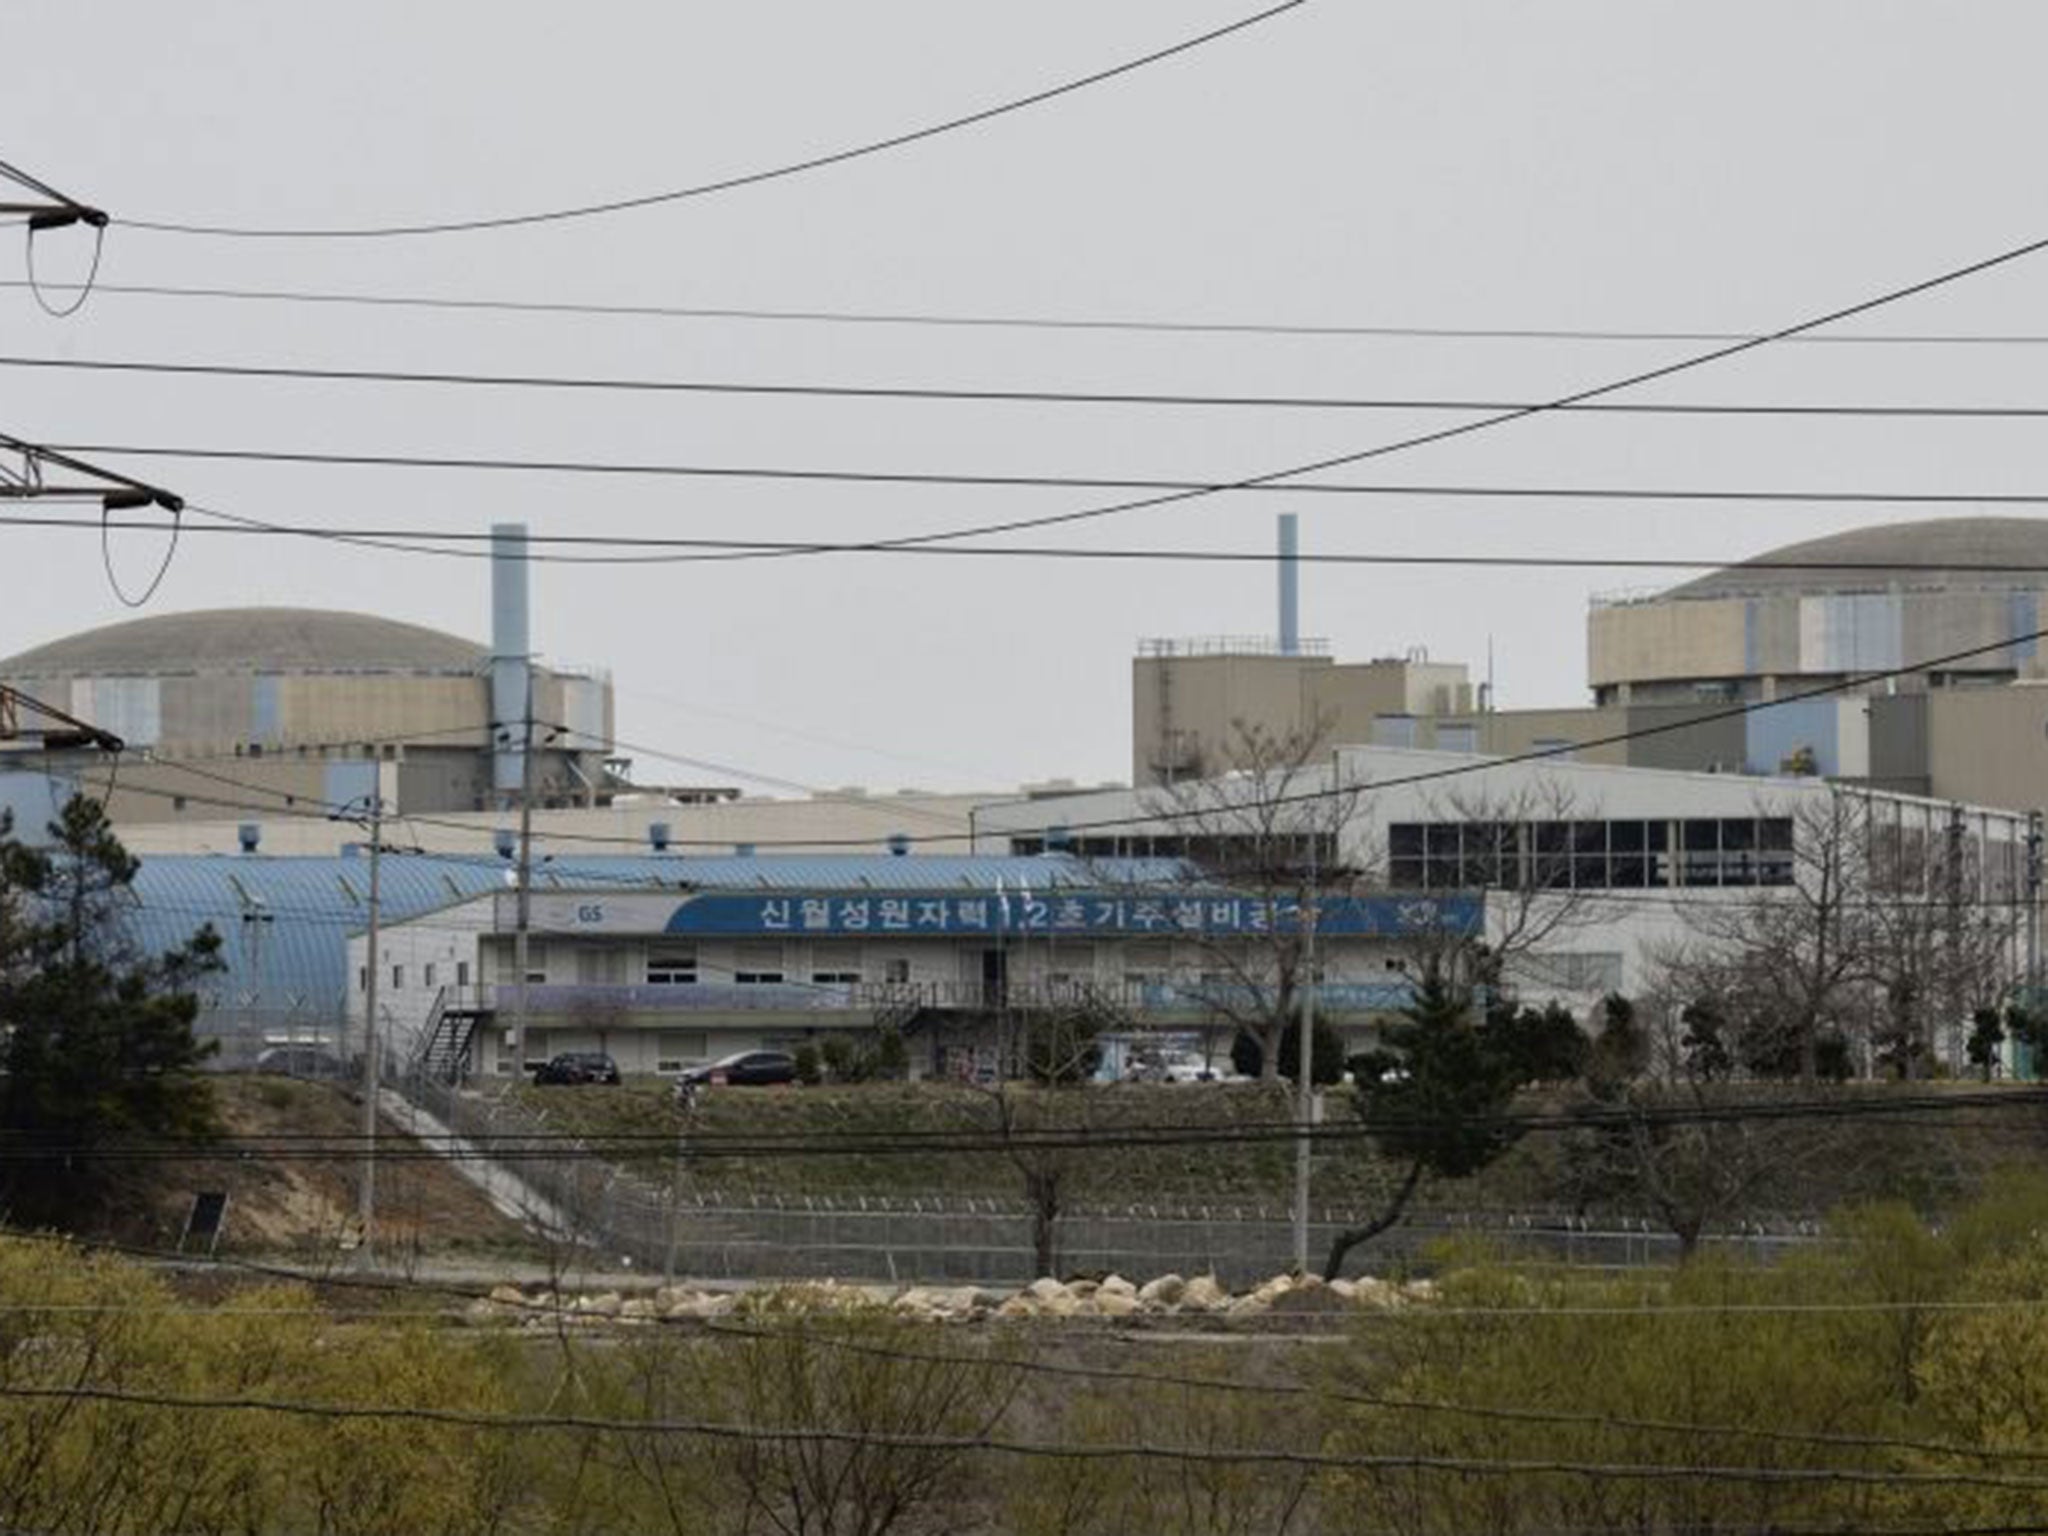 One of the hacked nuclear power plants in Wolseong, South Korea